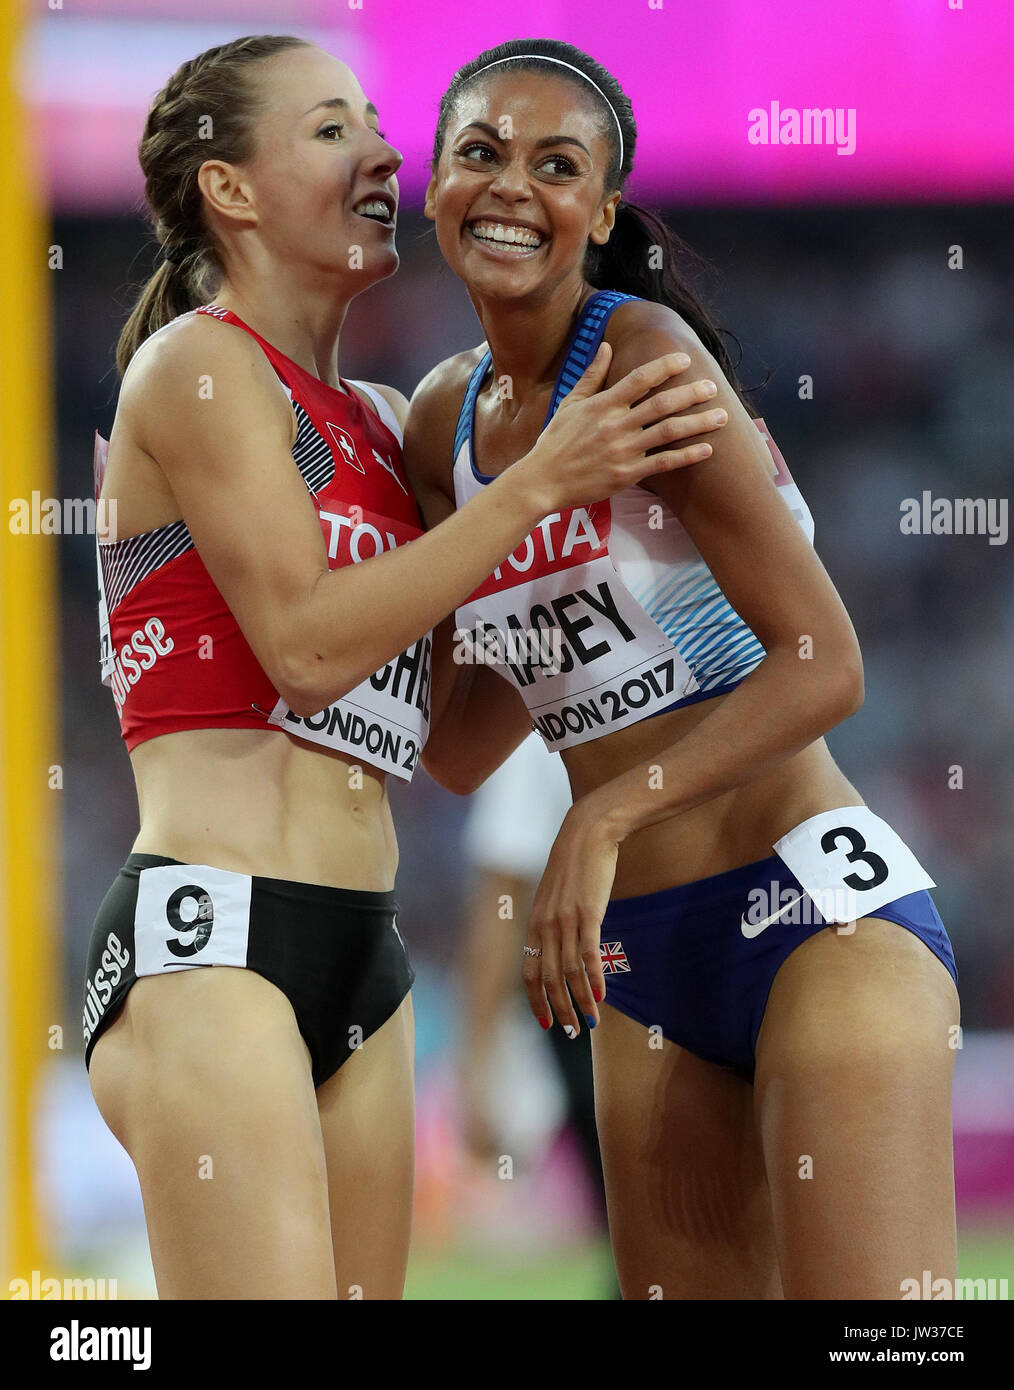 Great Britain's Adelle Tracey (right) and Switzerland's Selina Buchel react after the Women's 800m heat six during day seven of the 2017 IAAF World Championships at the London Stadium. Stock Photo